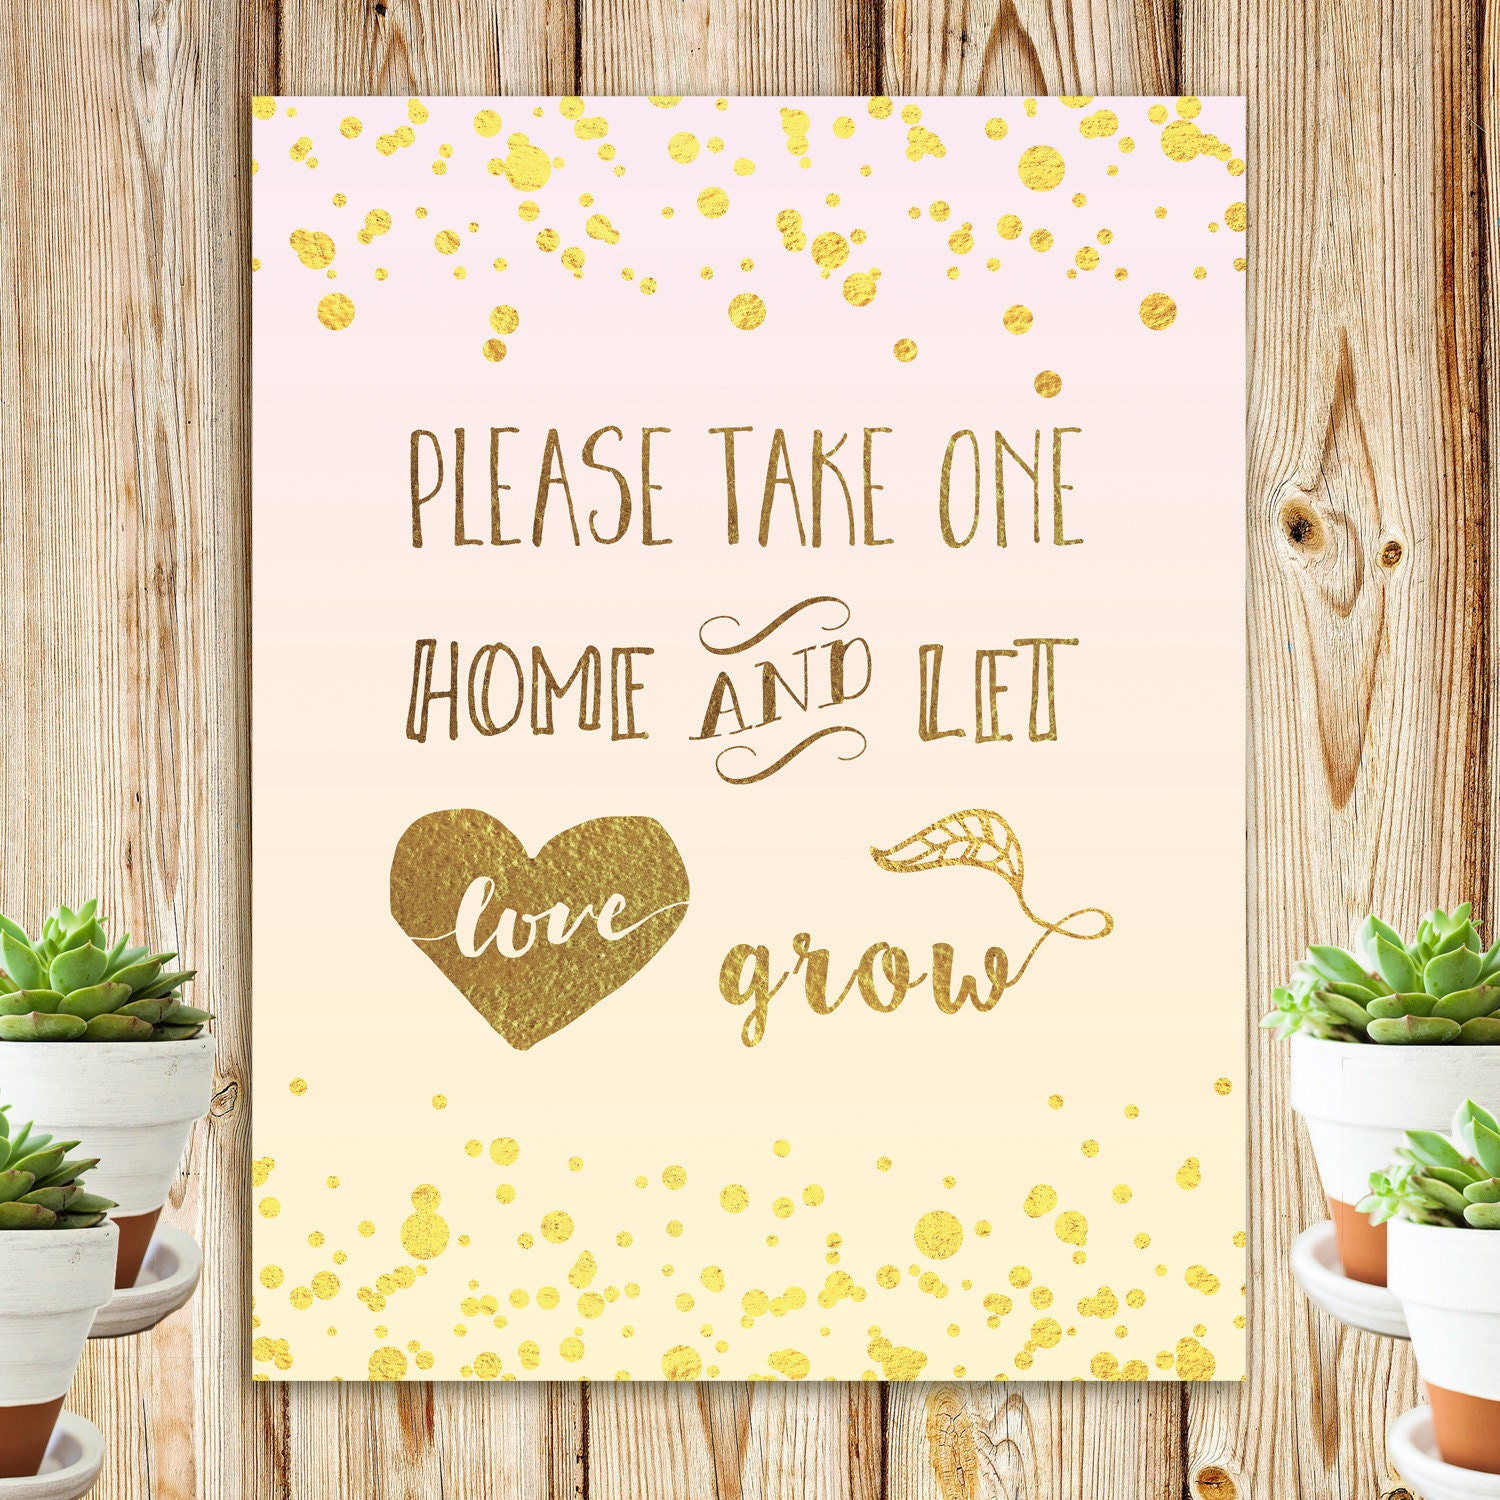 let-love-grow-sign-for-wedding-instant-download-printable